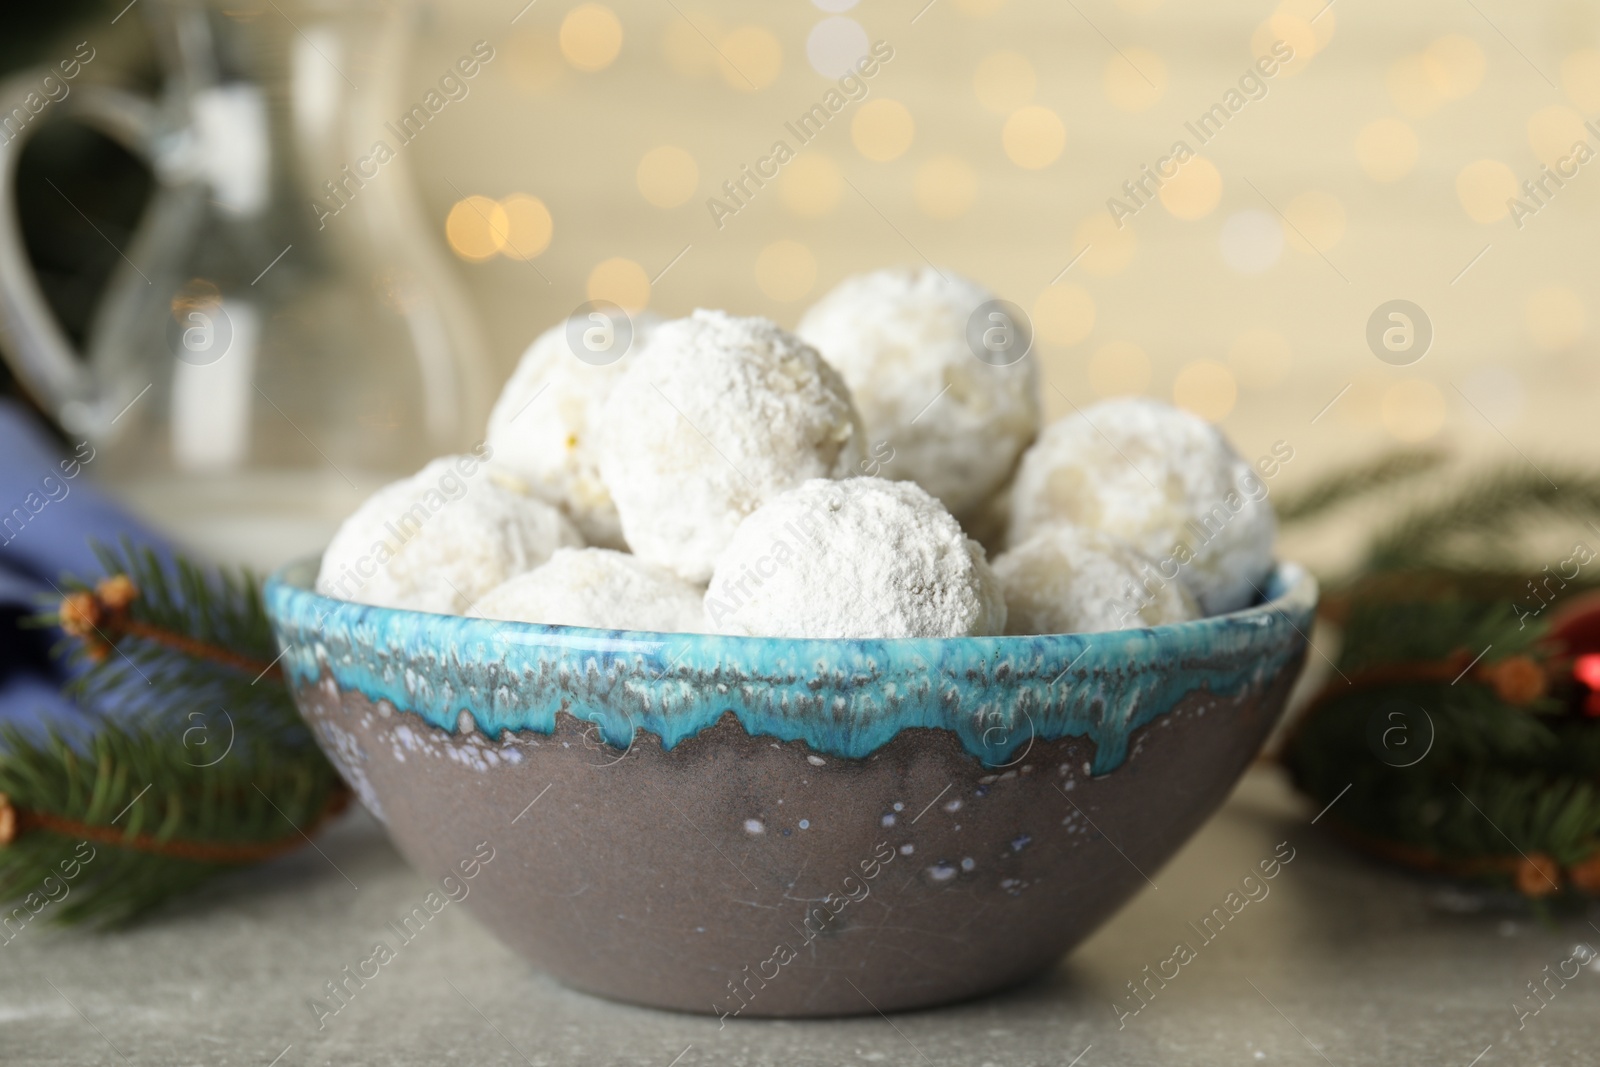 Photo of Tasty snowball cookies in bowl against blurred festive lights. Christmas treat